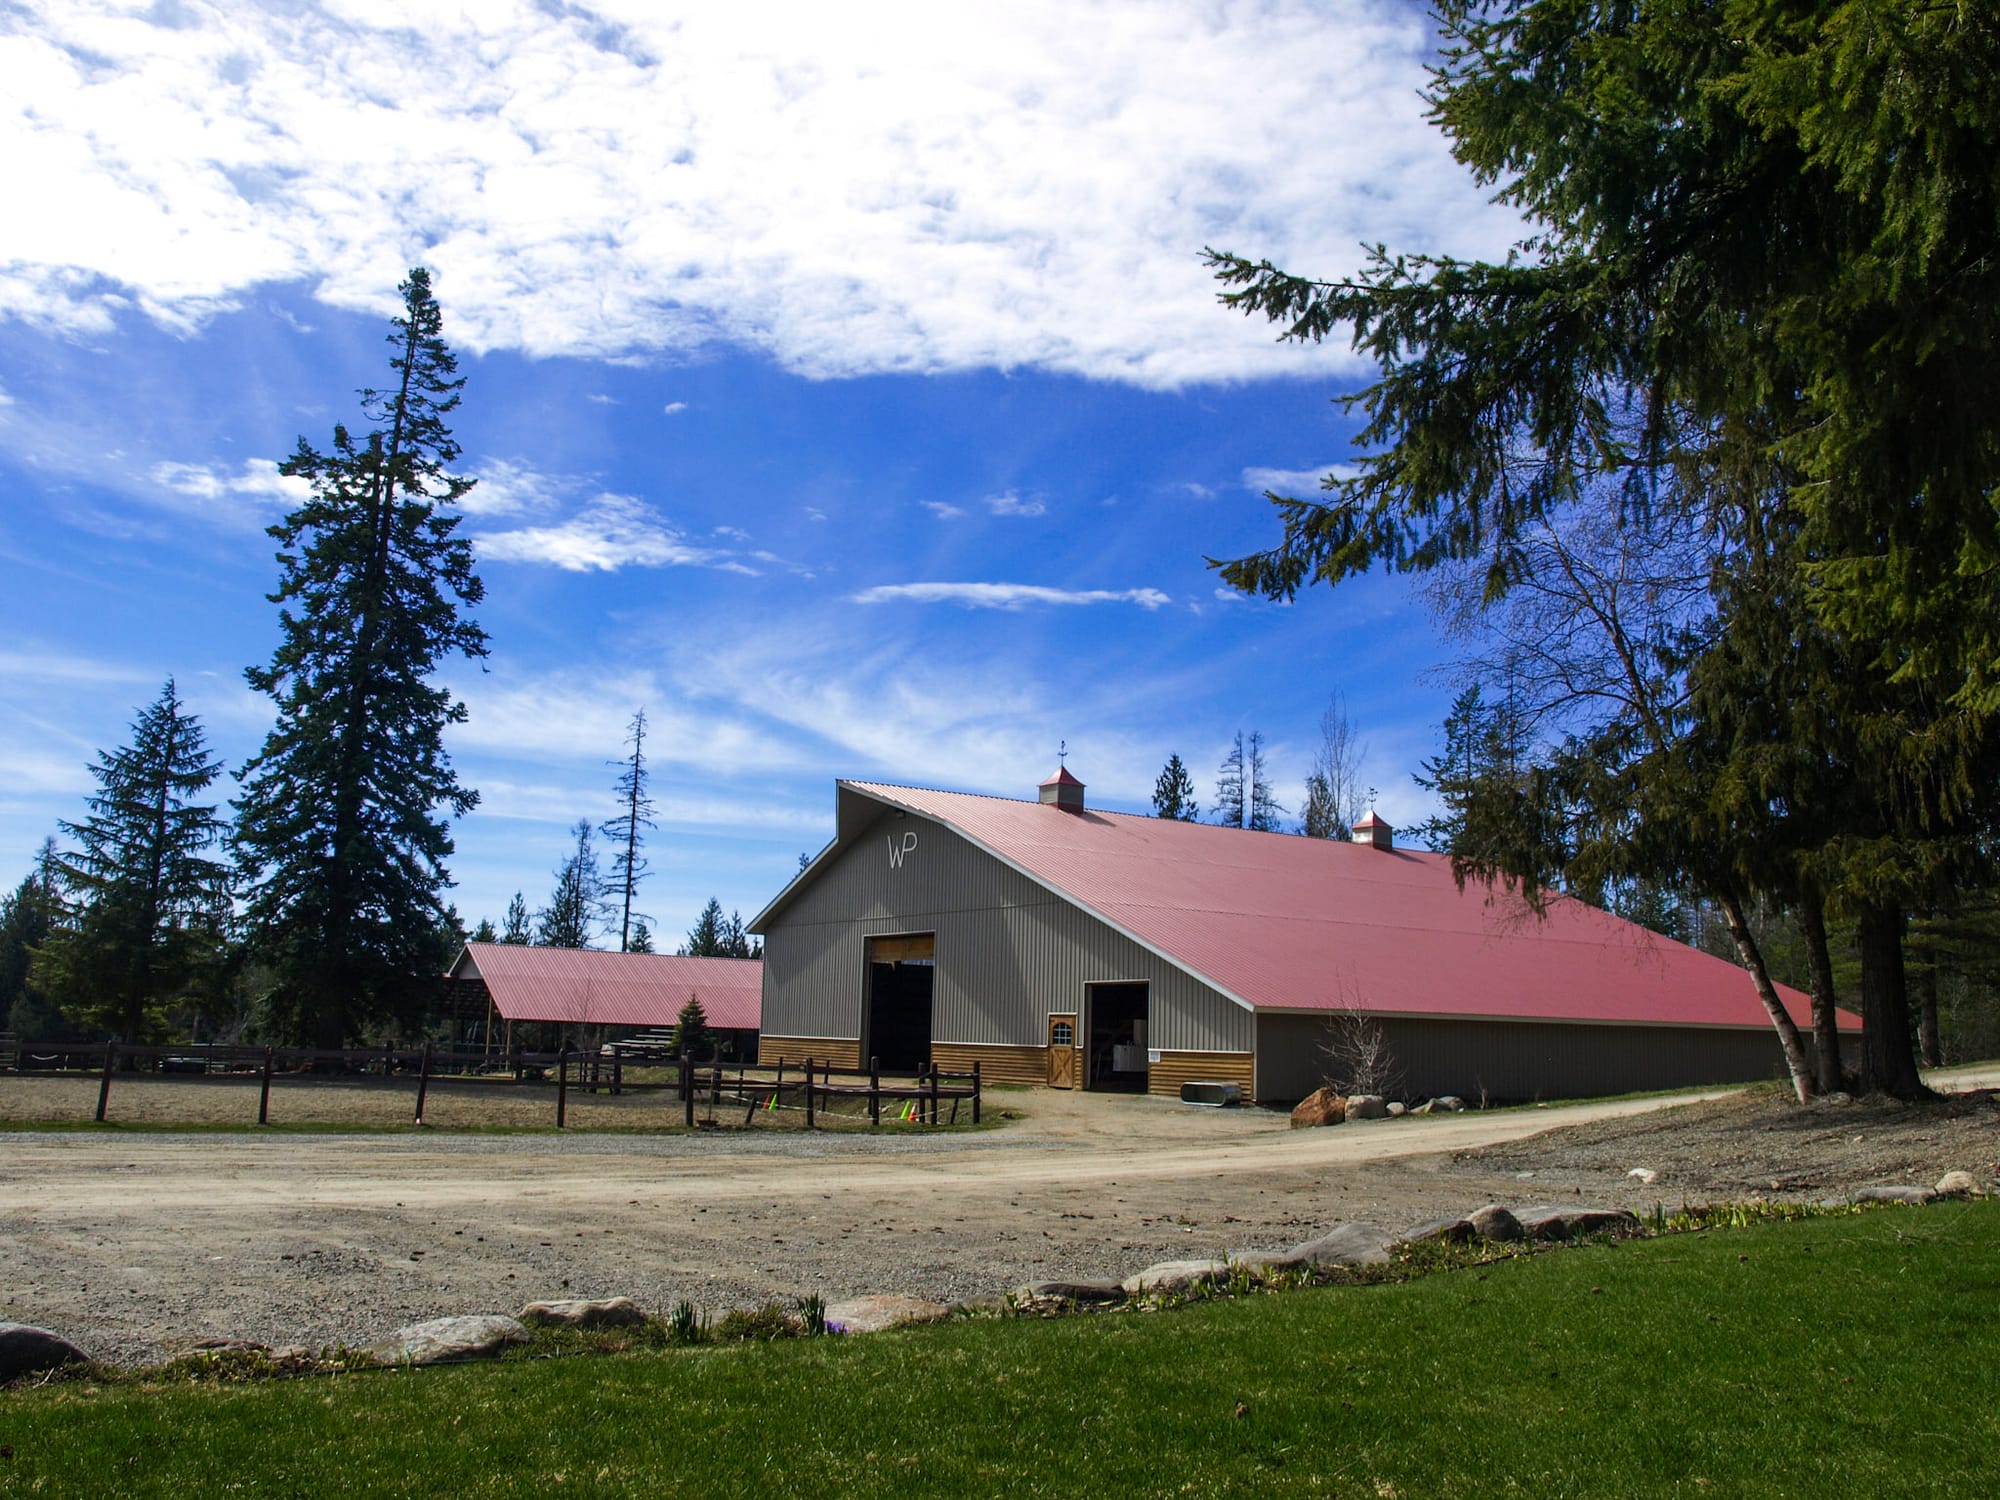 Large grey indoor arena barn with red roof and blue sky above